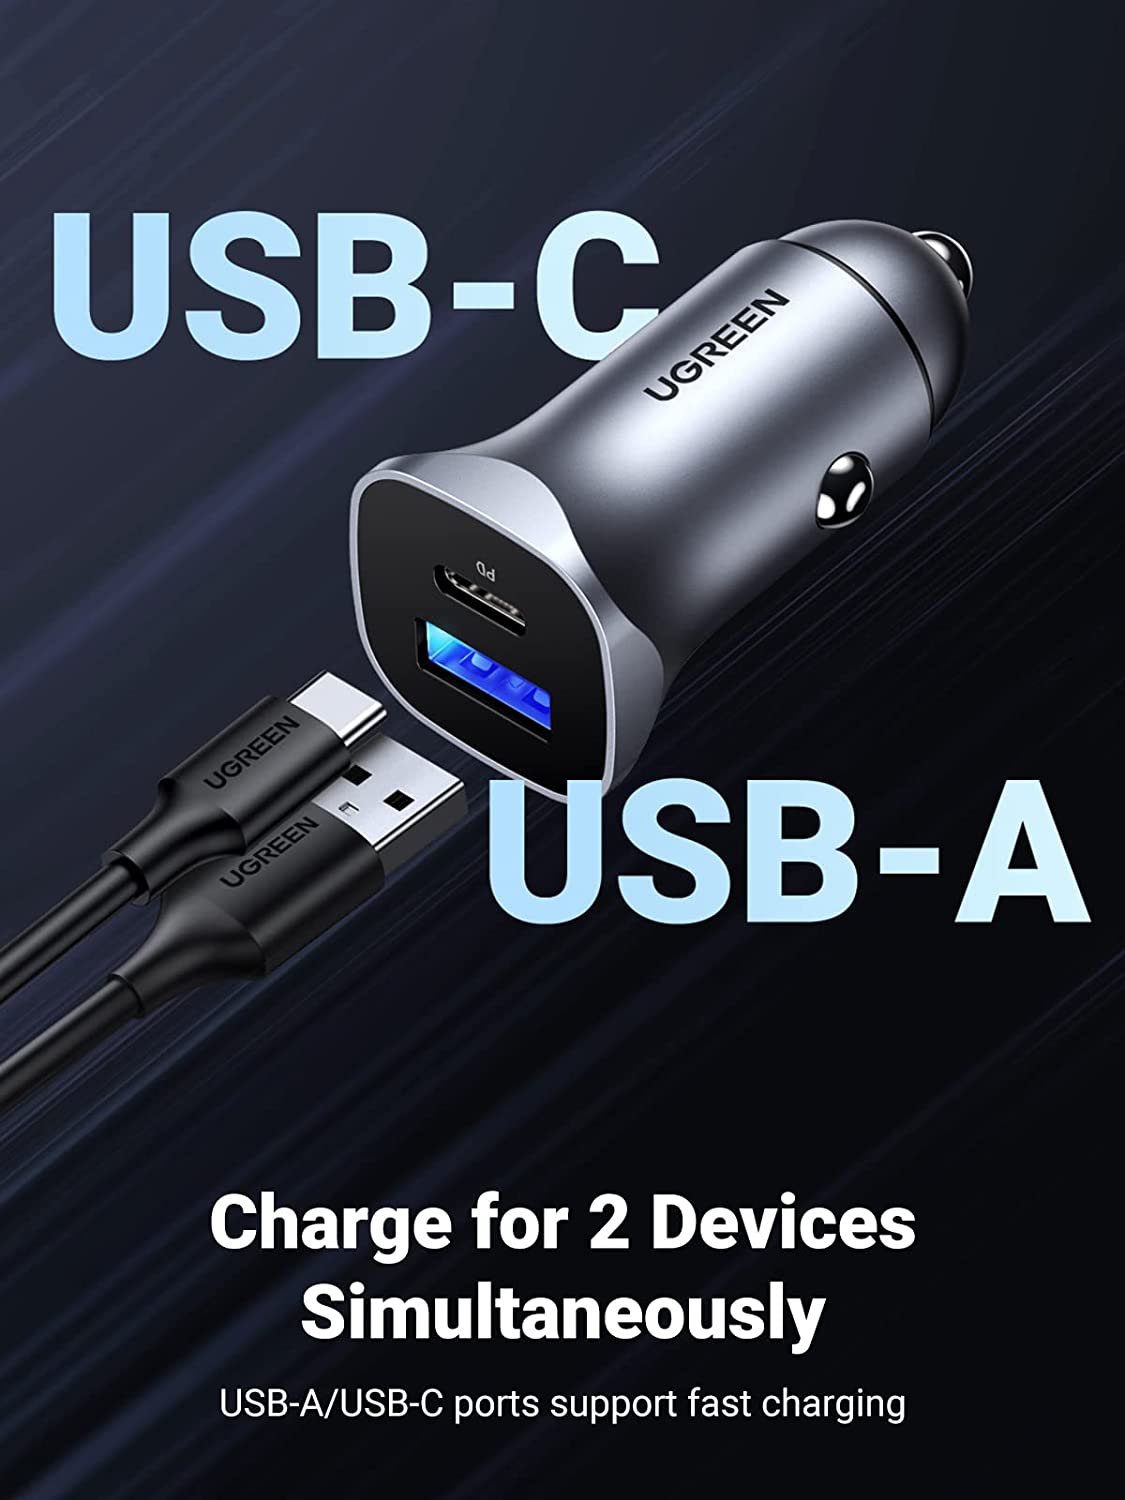 UGREEN Car Charger, Dual USB Car Charger with 24W 4.8A Car Charging Adapter  Compatible for iPhone 12/SE/11 Pro Max XS XR X 8 iPad Pro Air Mini